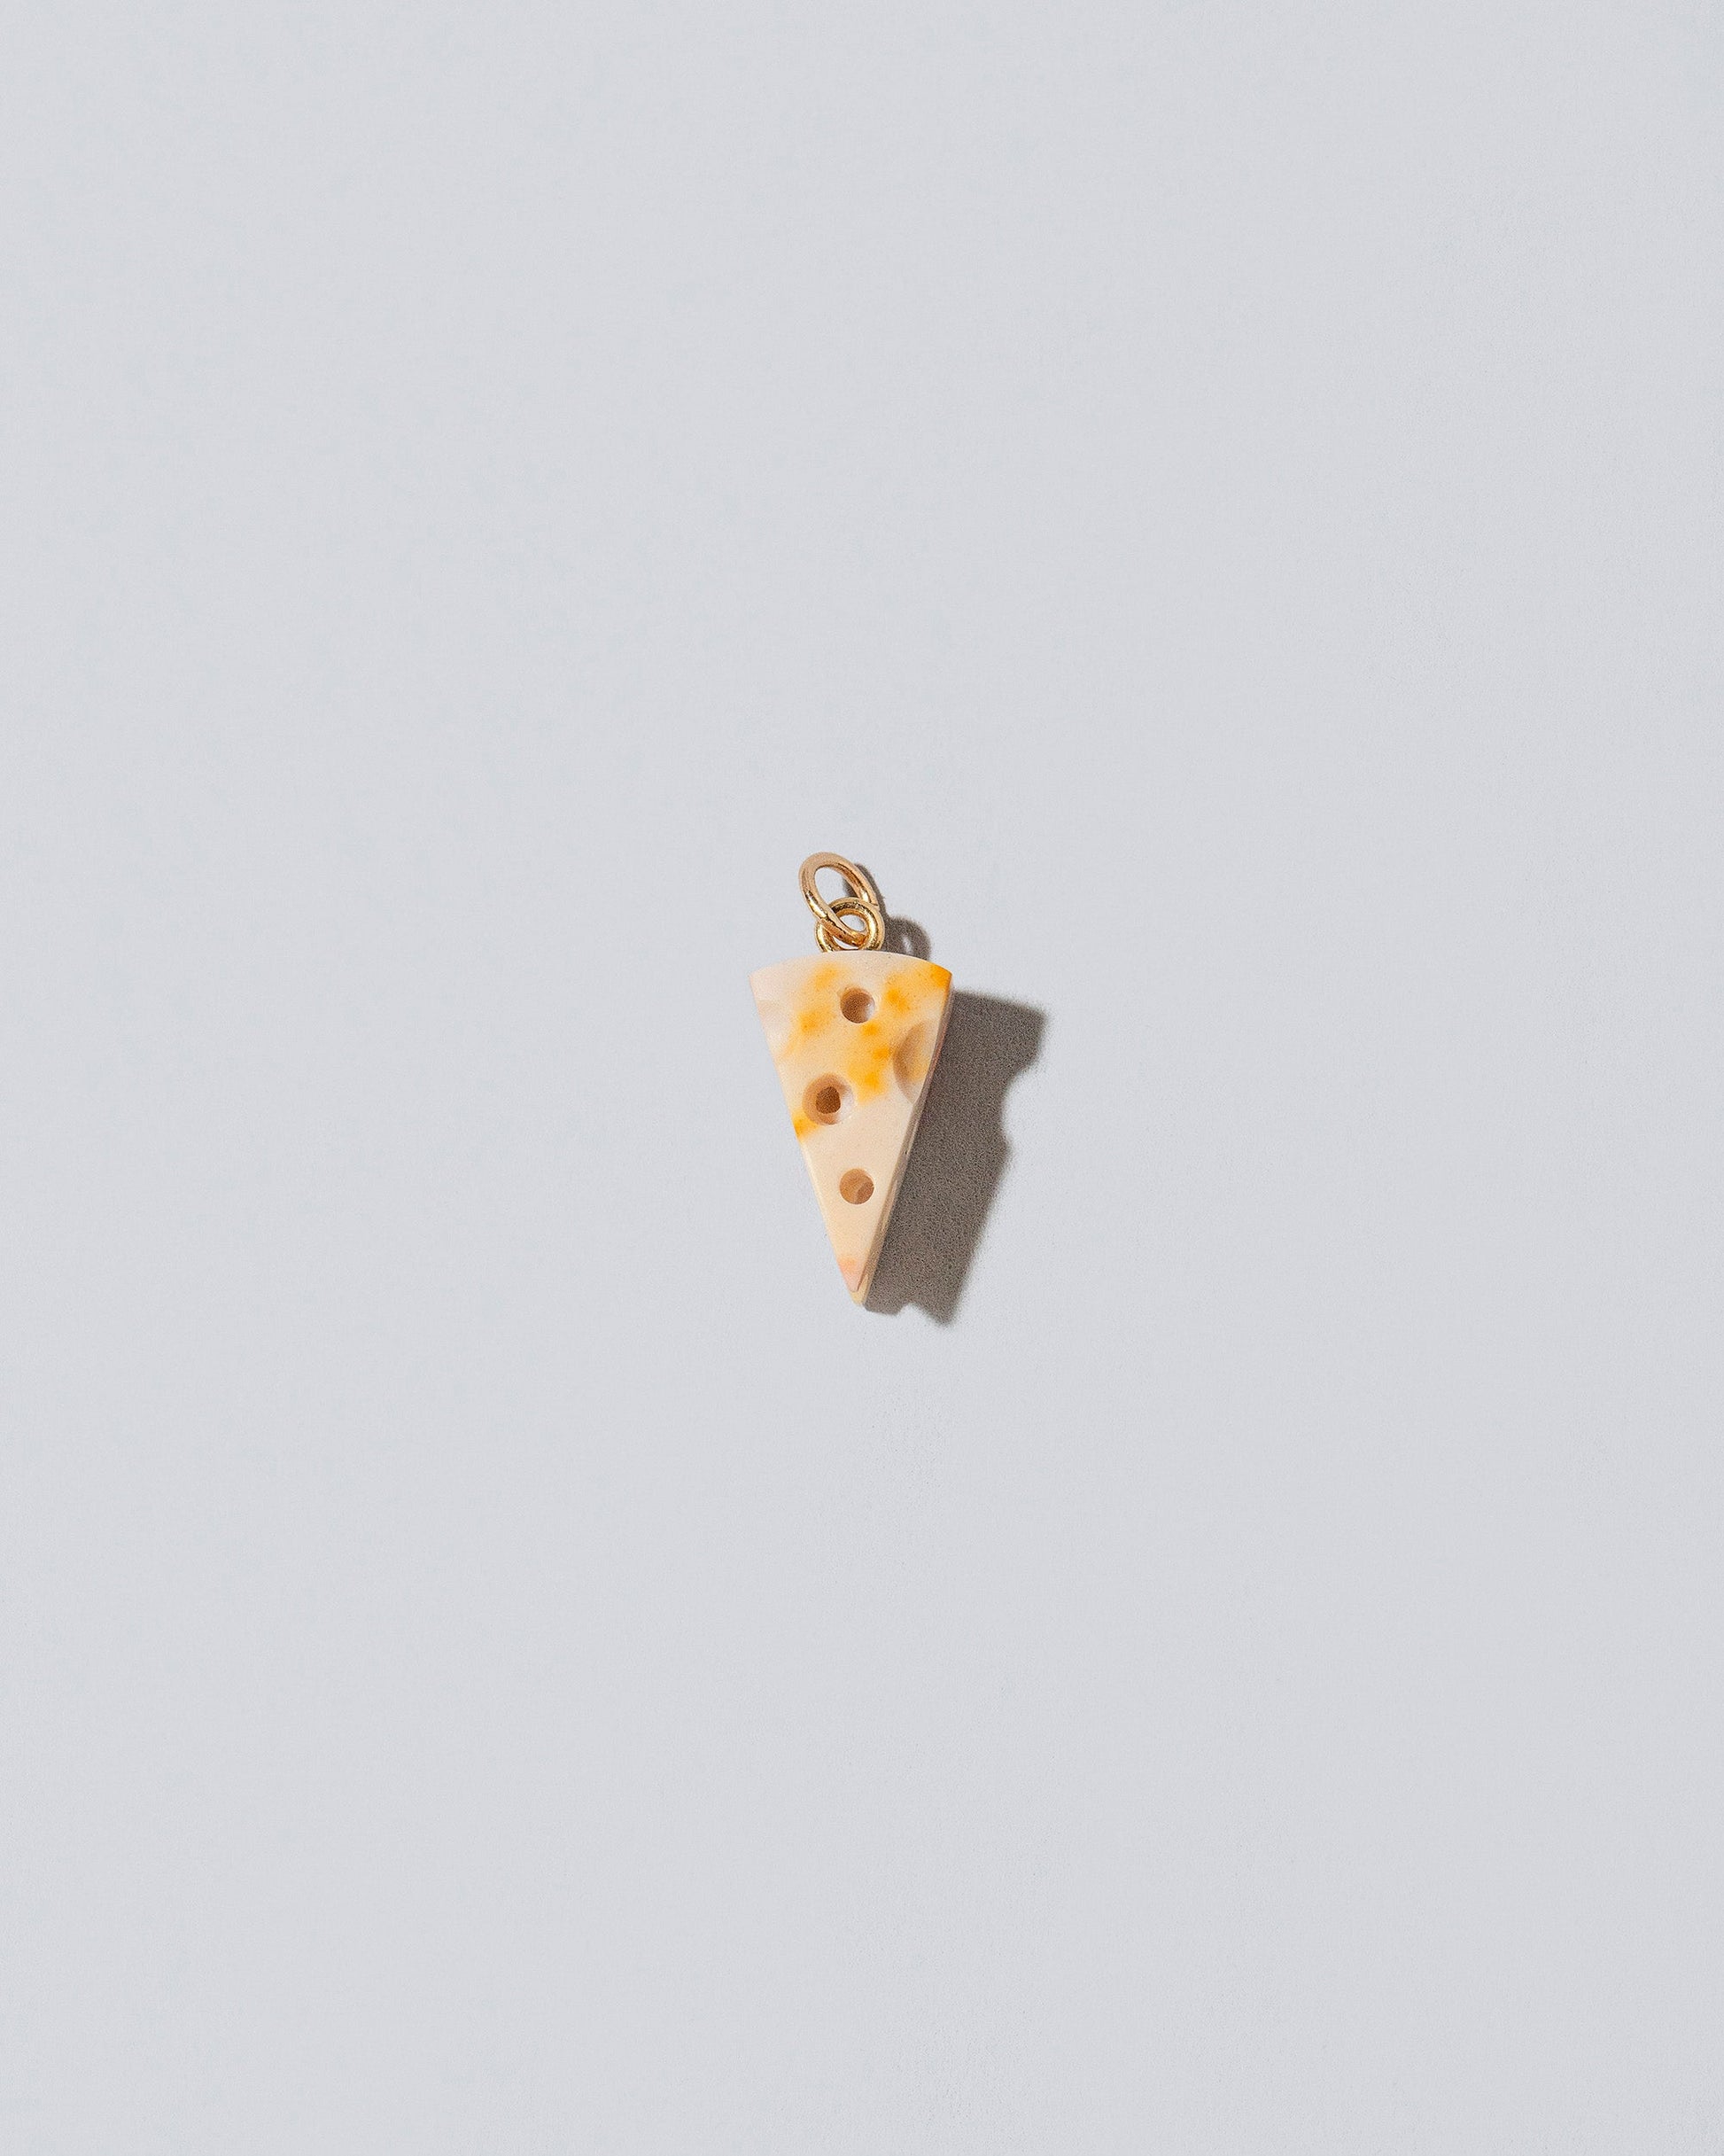  Swiss Cheese Charm on light color background.